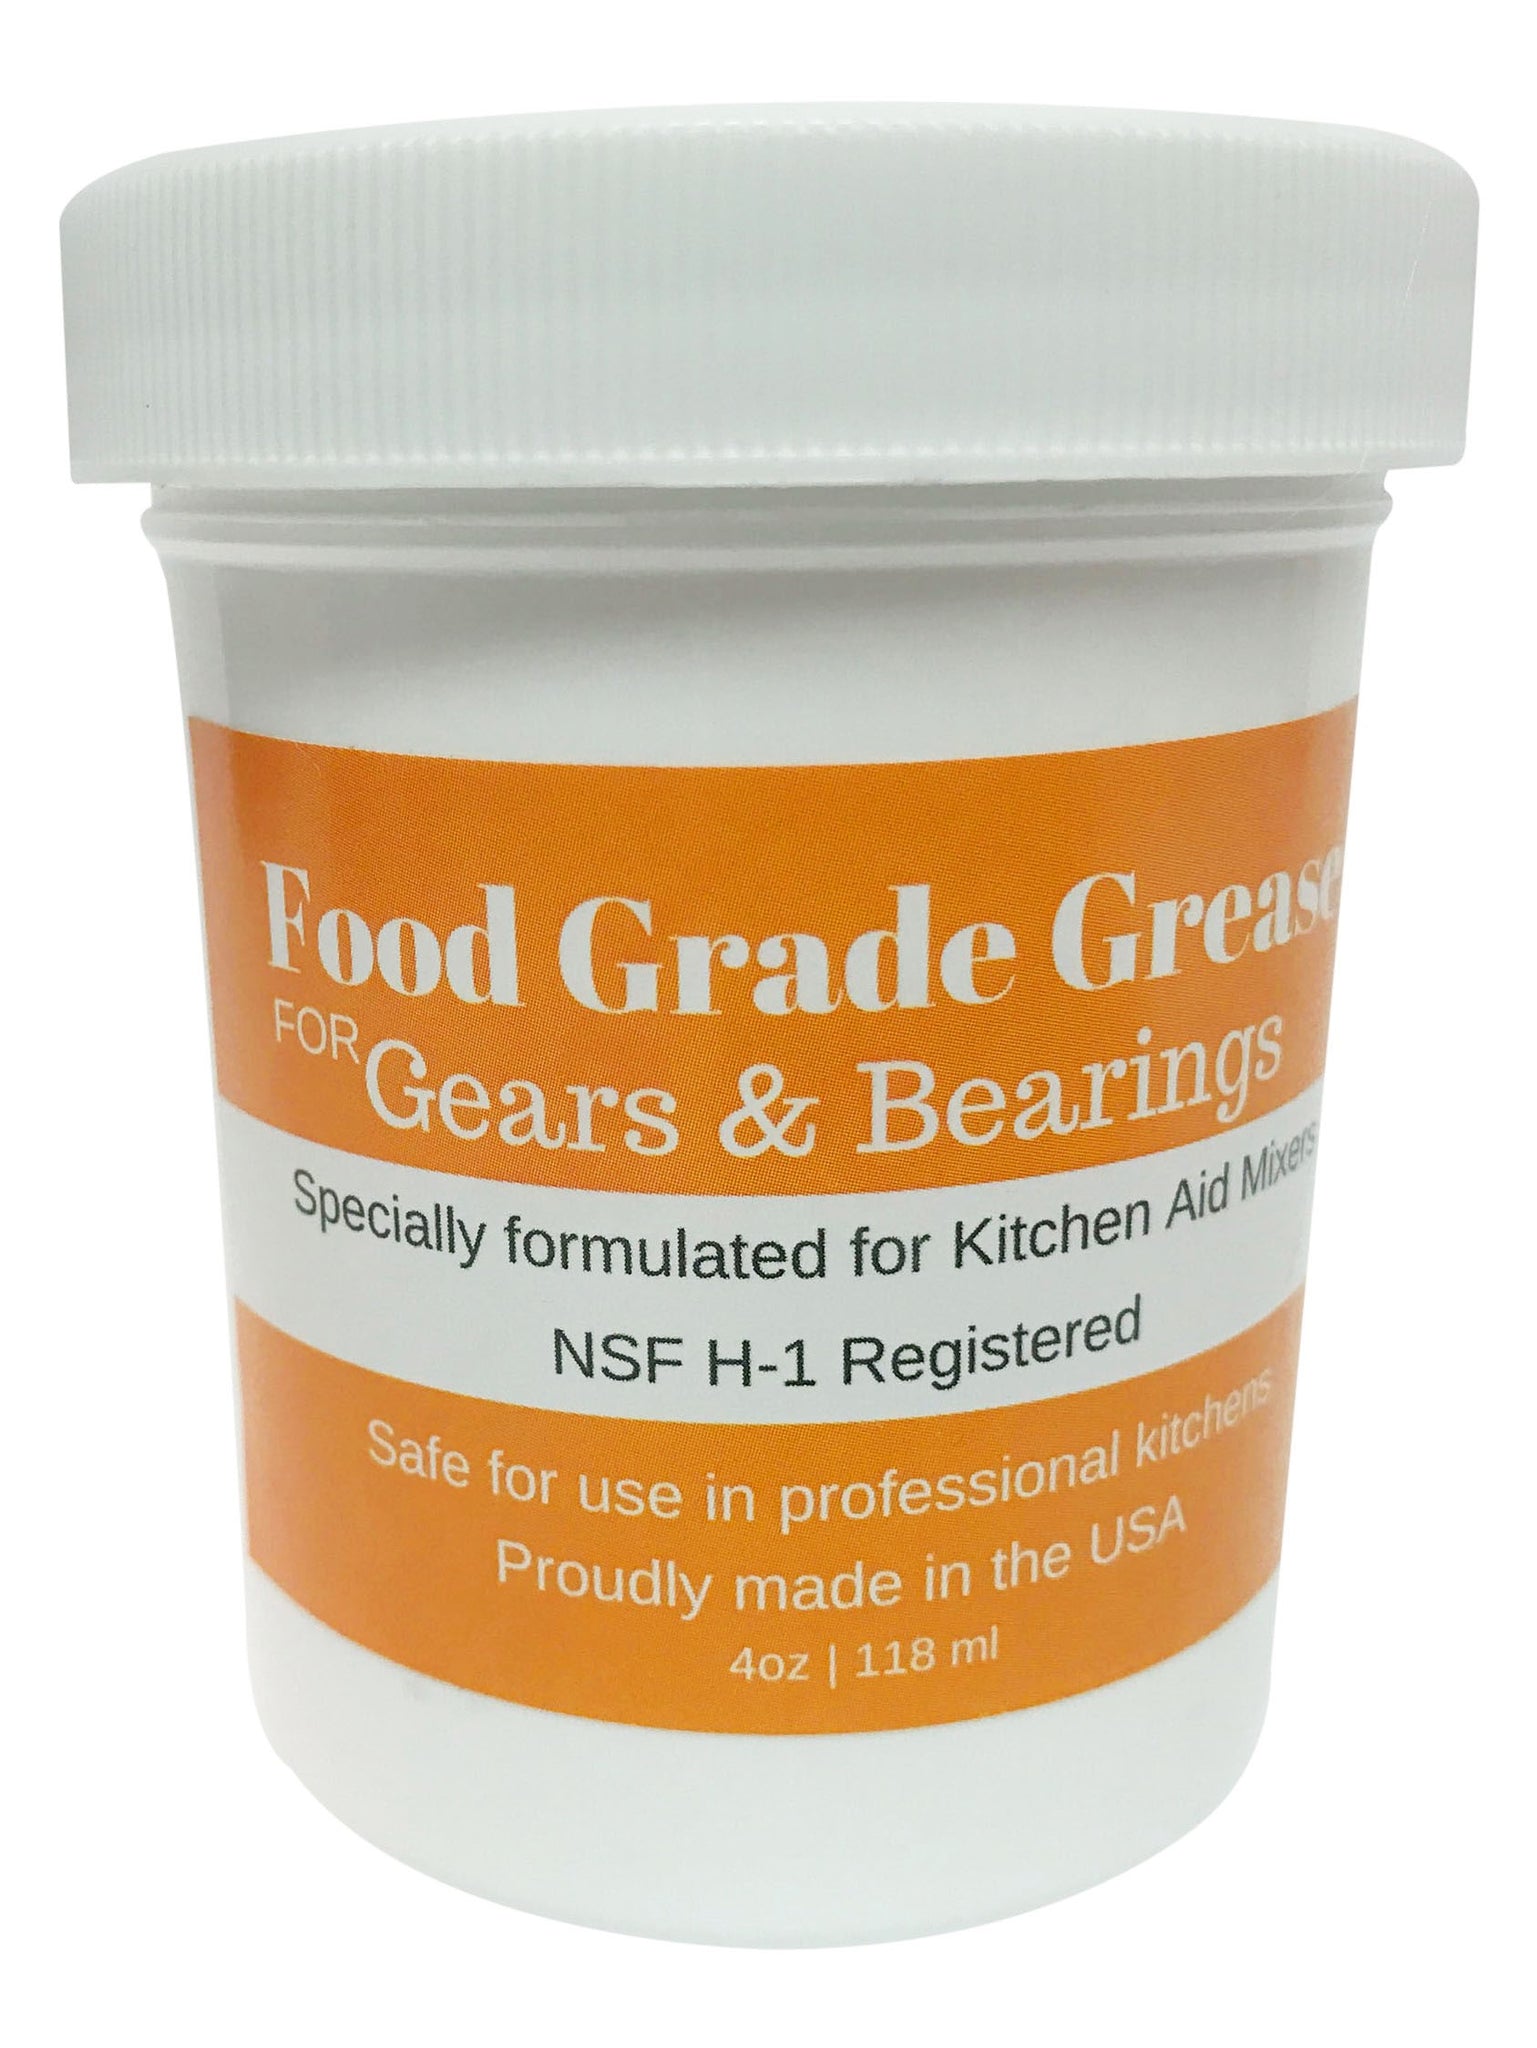 4 Oz Food Grade Grease for KitchenAid Stand Mixer - MADE IN THE